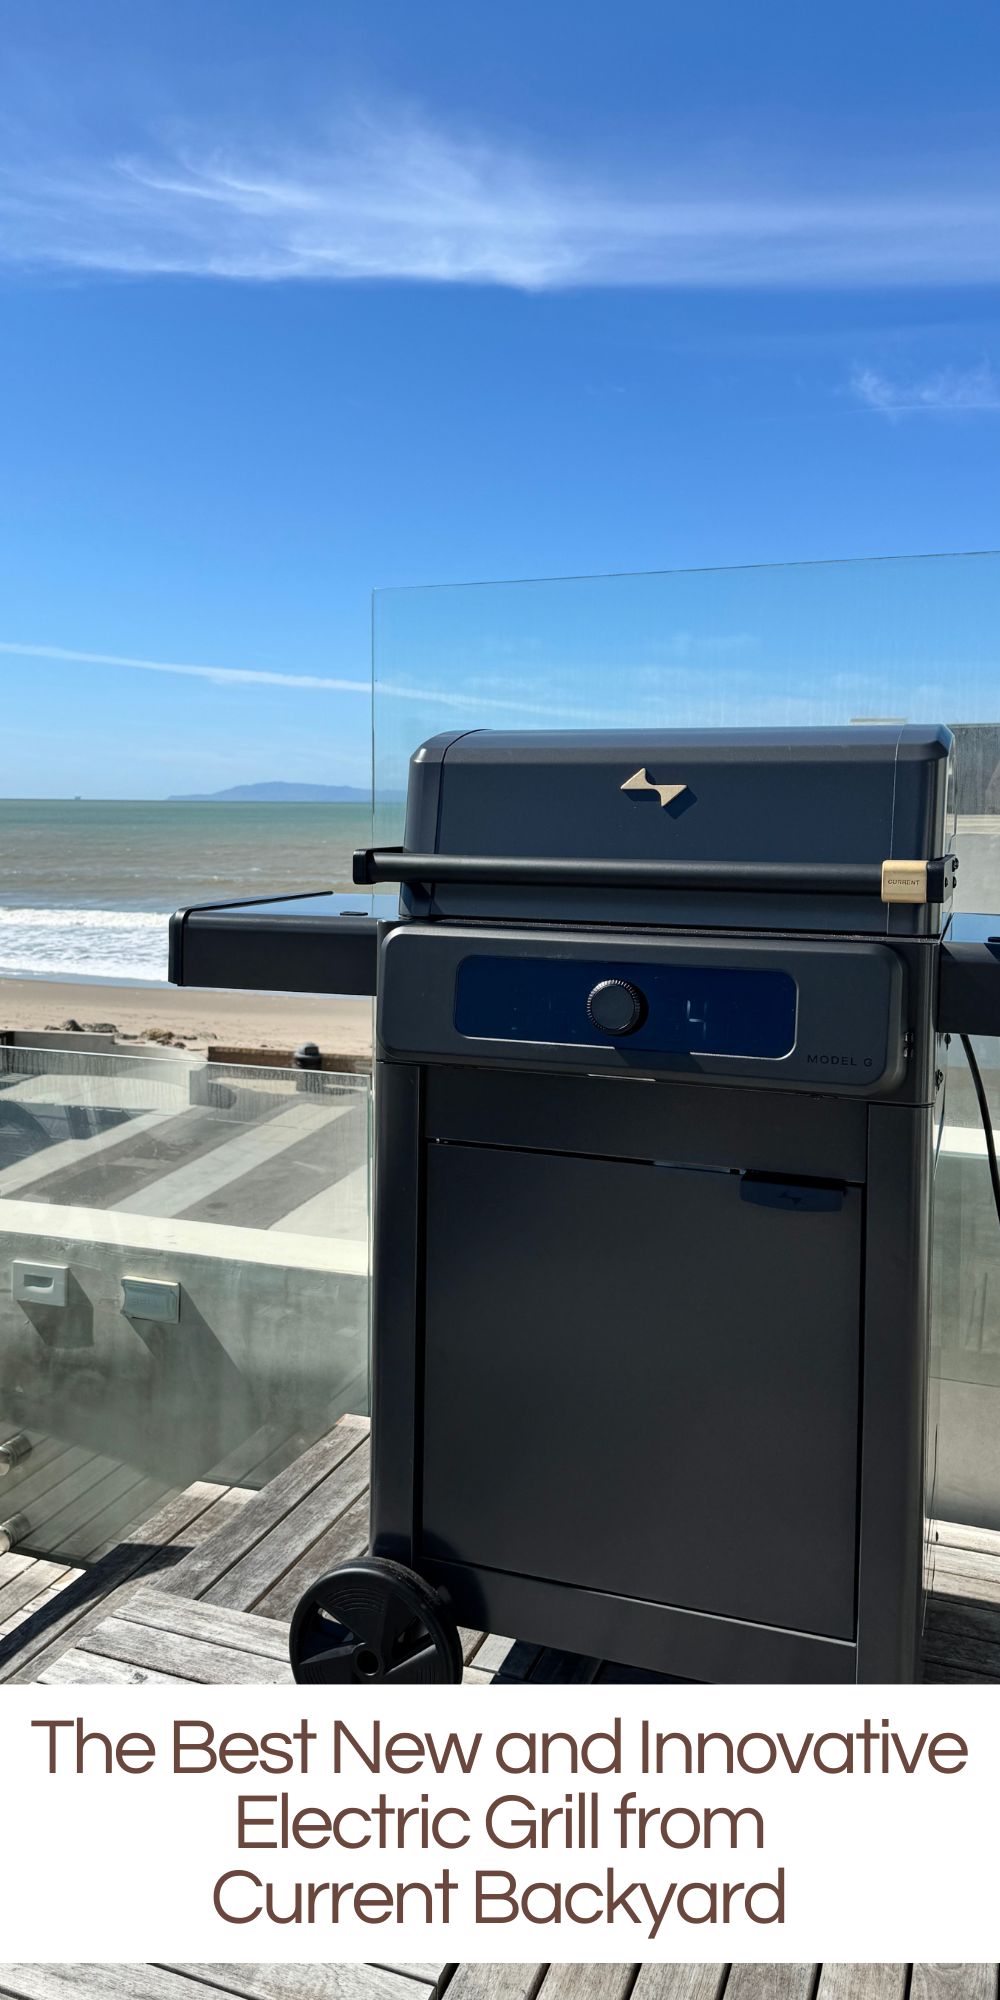 Meet the Current Backyard Model G Dual Zone Electric Grill, a new piece of culinary equipment that's changing the way we think about outdoor cooking. 